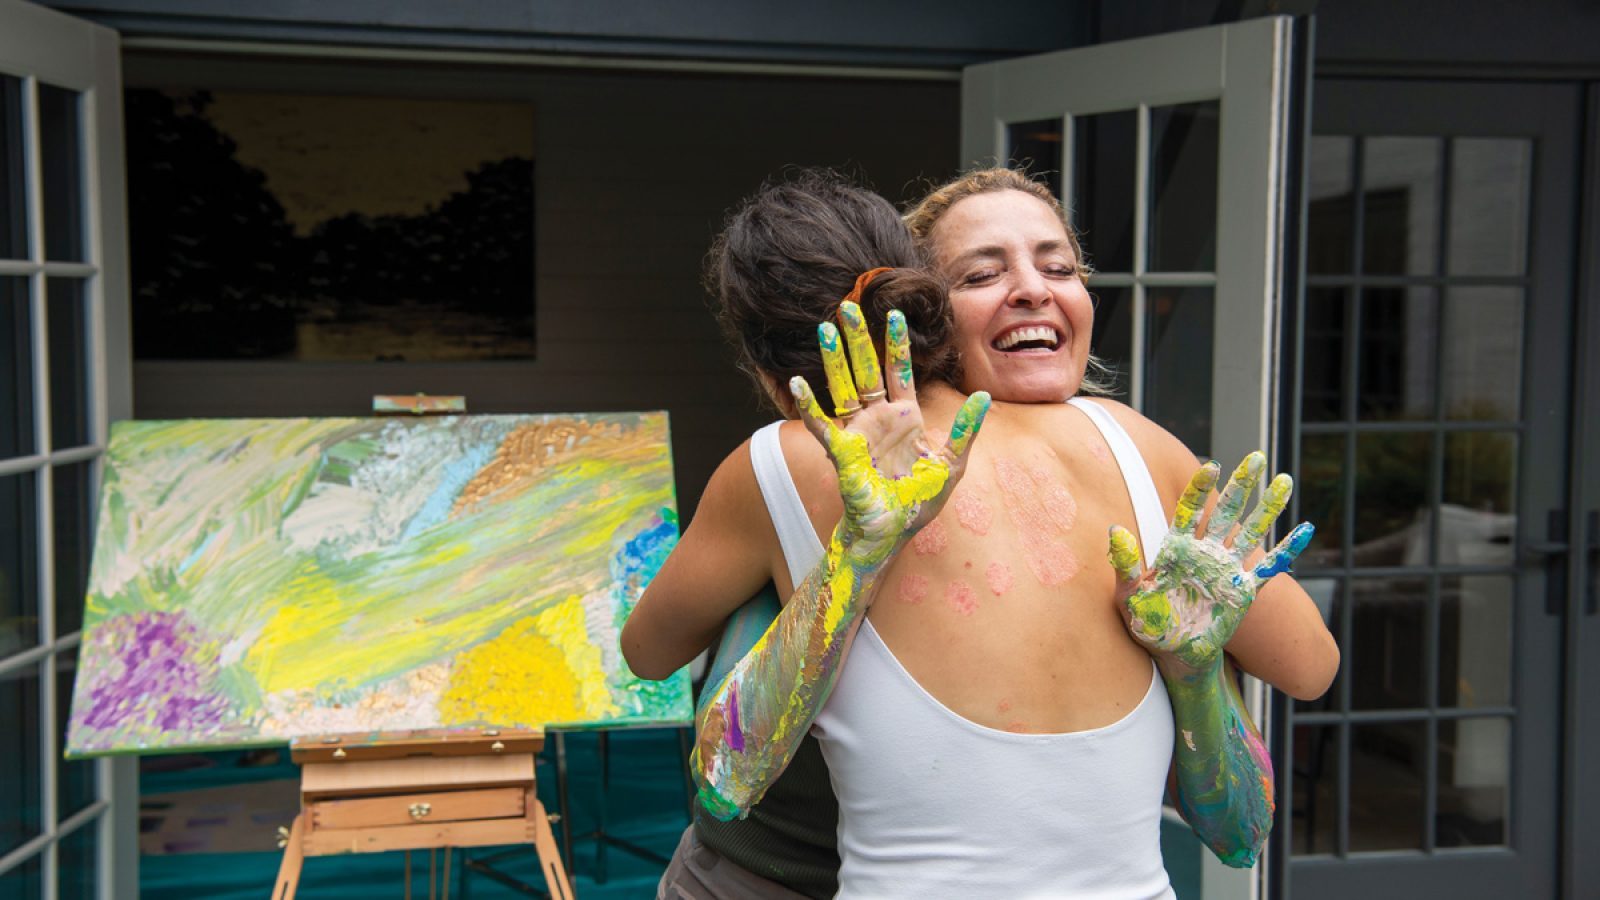 Two women hug each other in front of a painted easel. One of the women facing the camera holds out her painted hands.